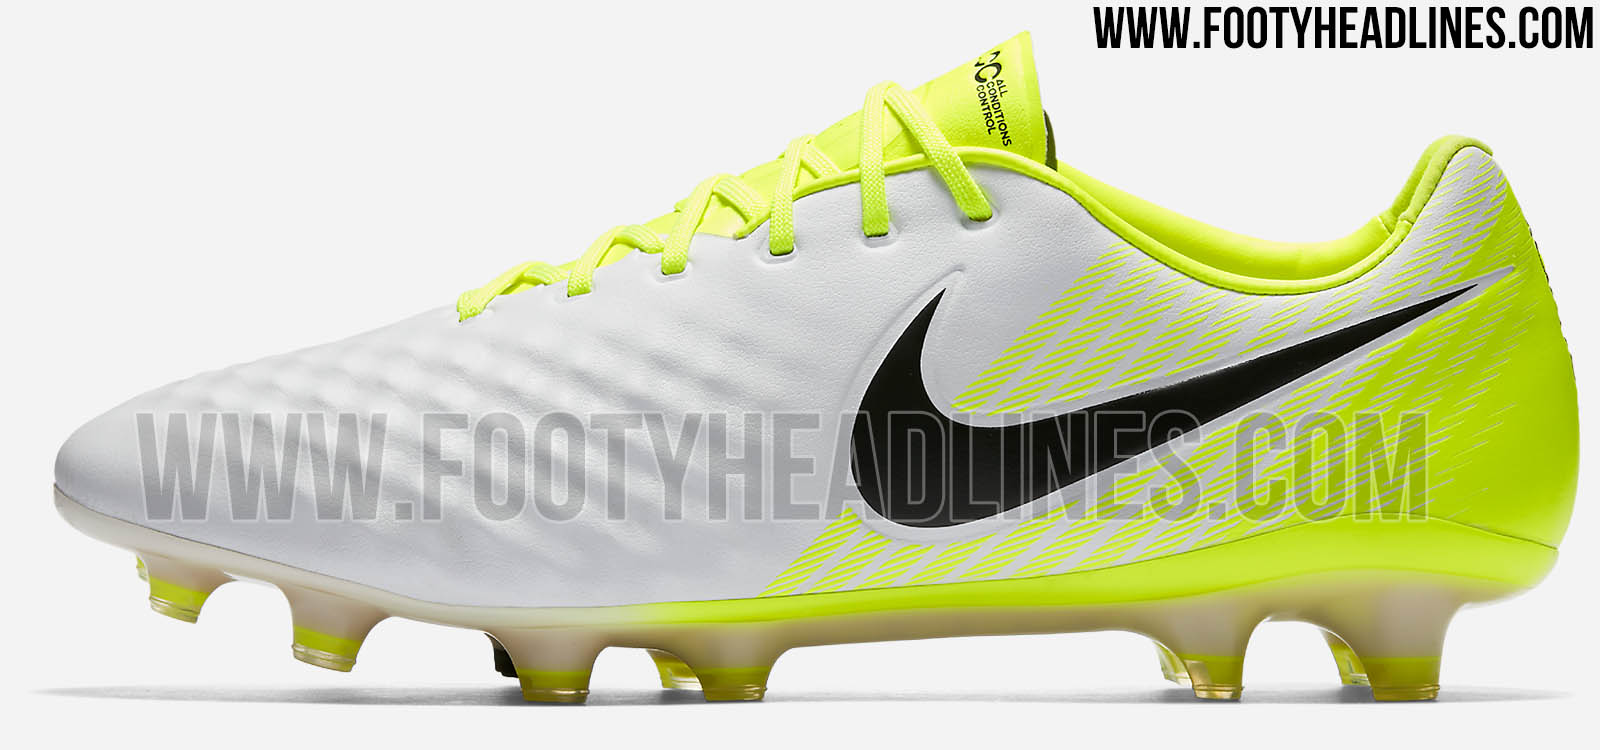 All-New Upper - White & Volt Nike Magista Opus Boots Released - Footy